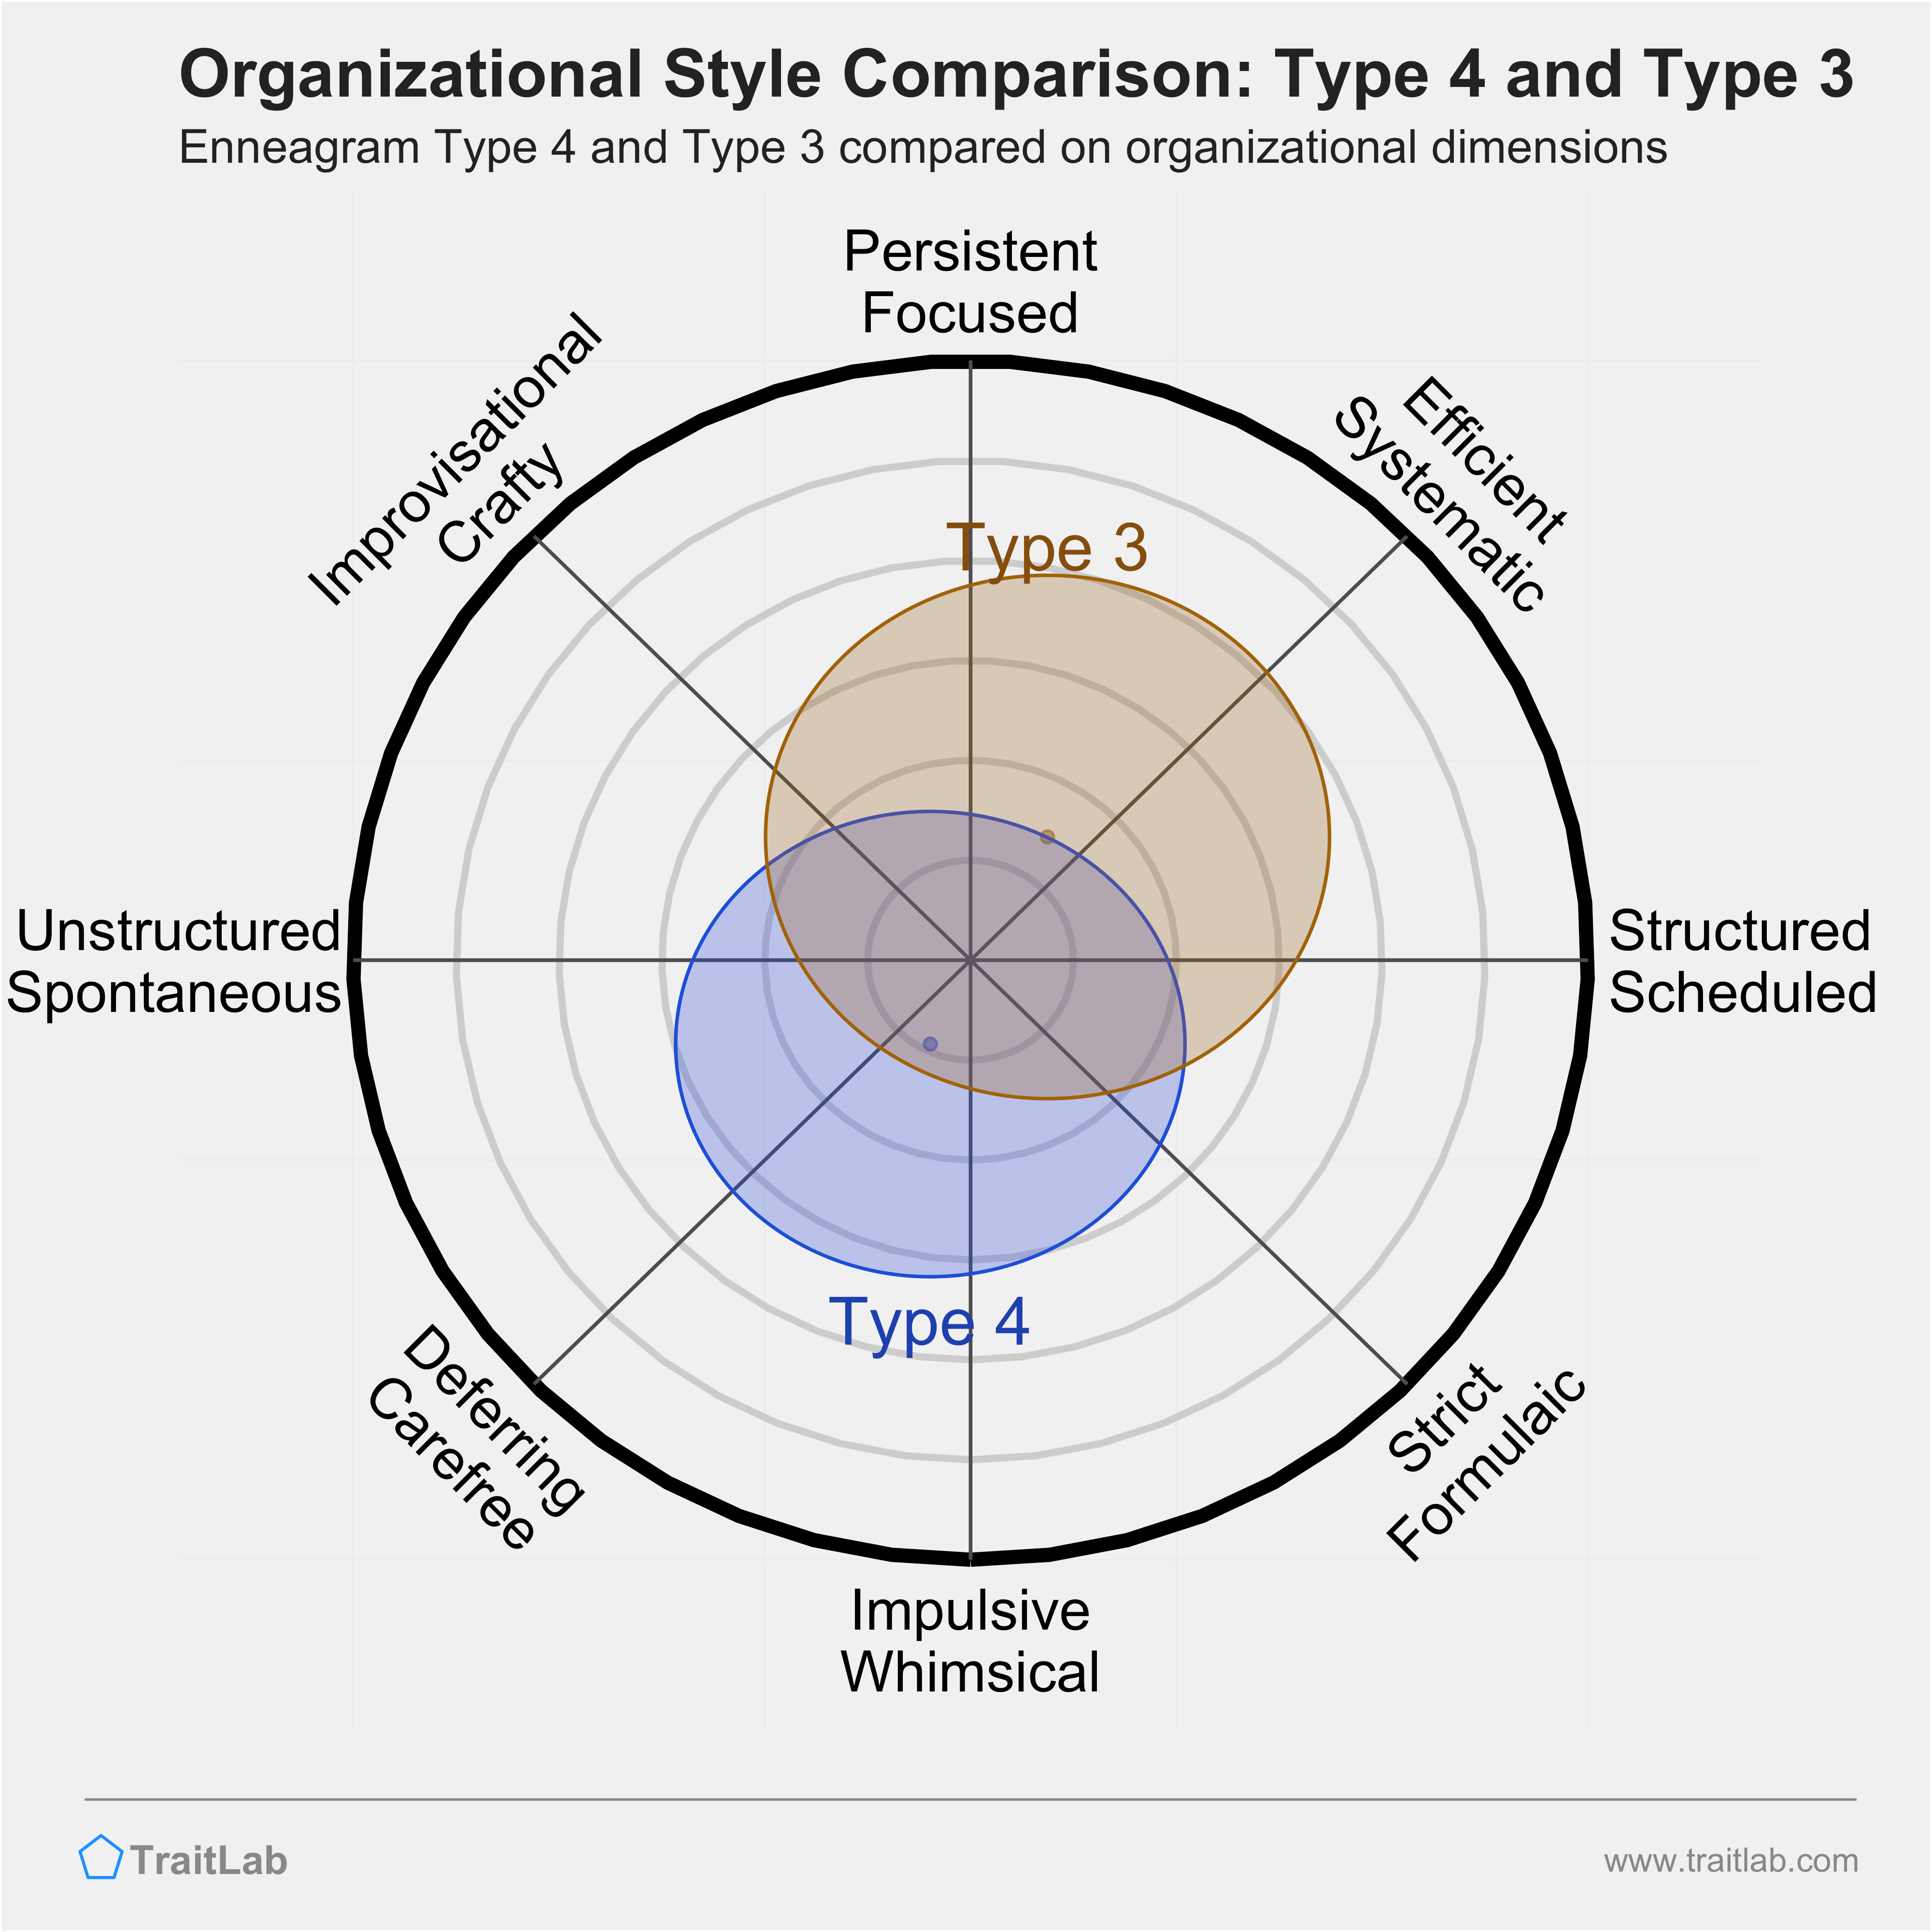 Type 4 and Type 3 comparison across organizational dimensions